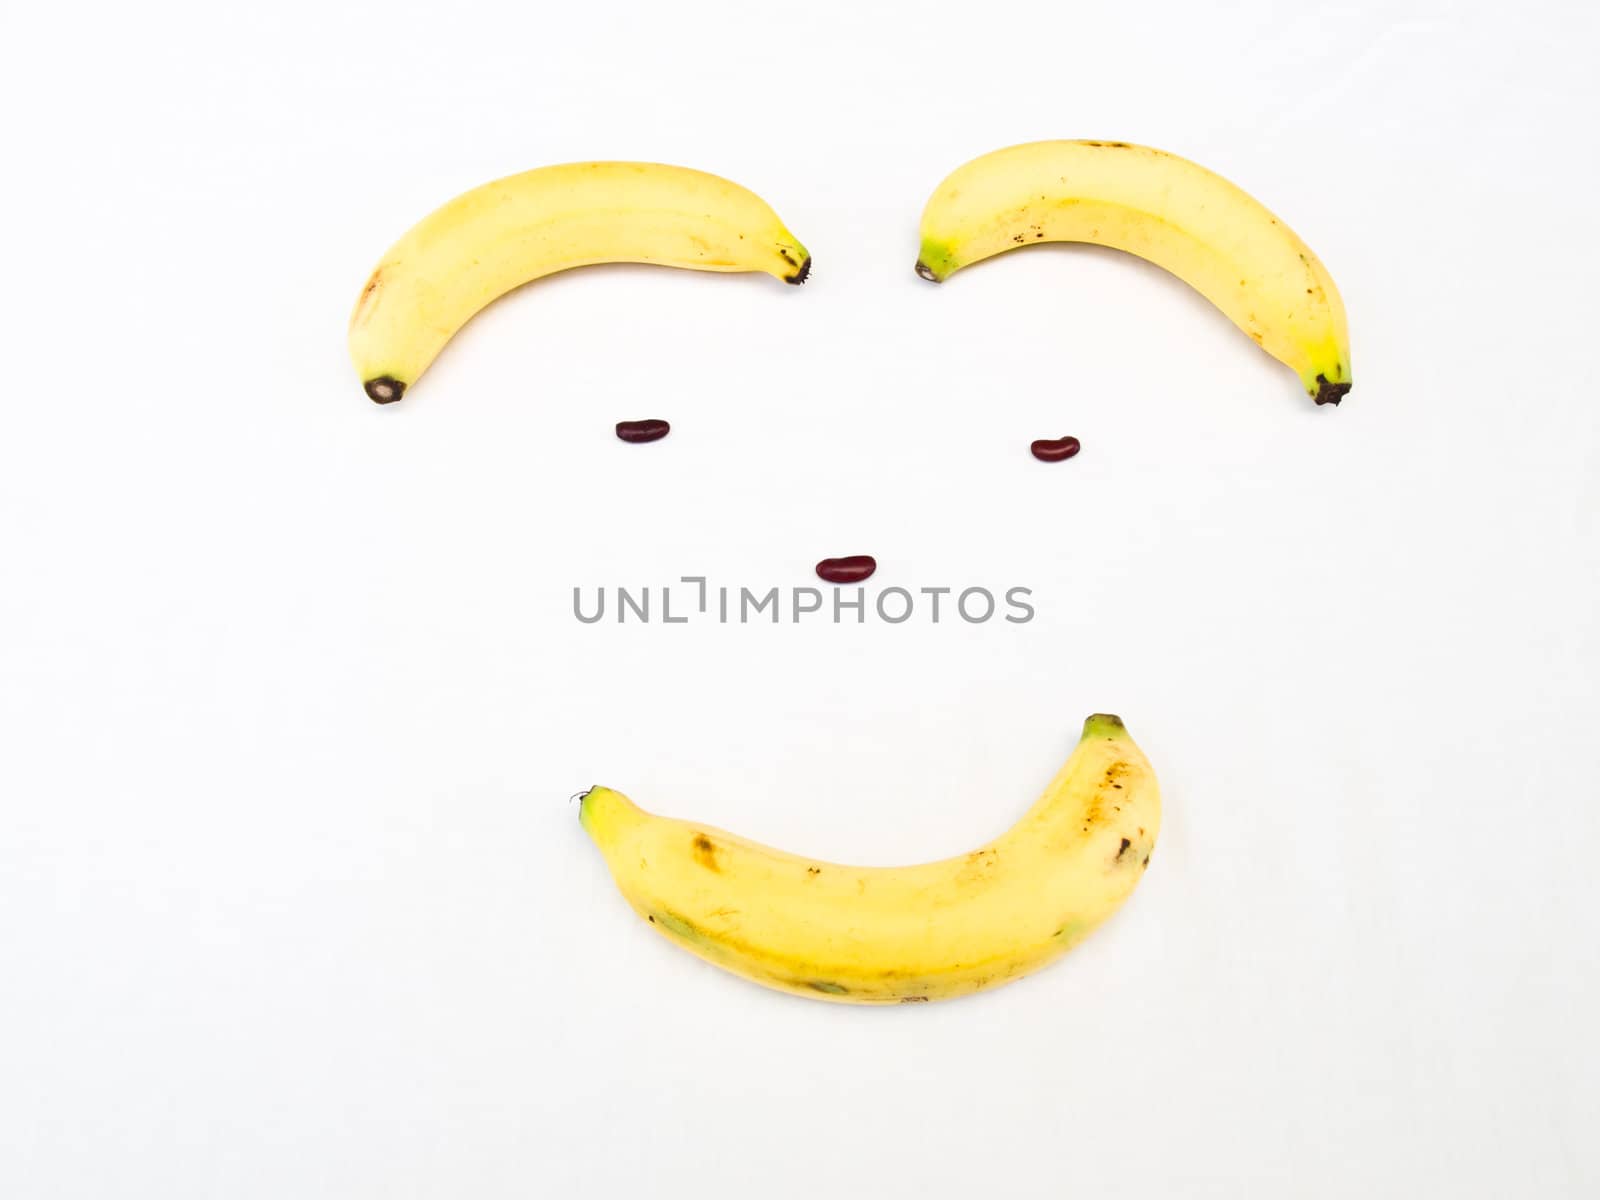 Smiling face made from banana and kidney bean